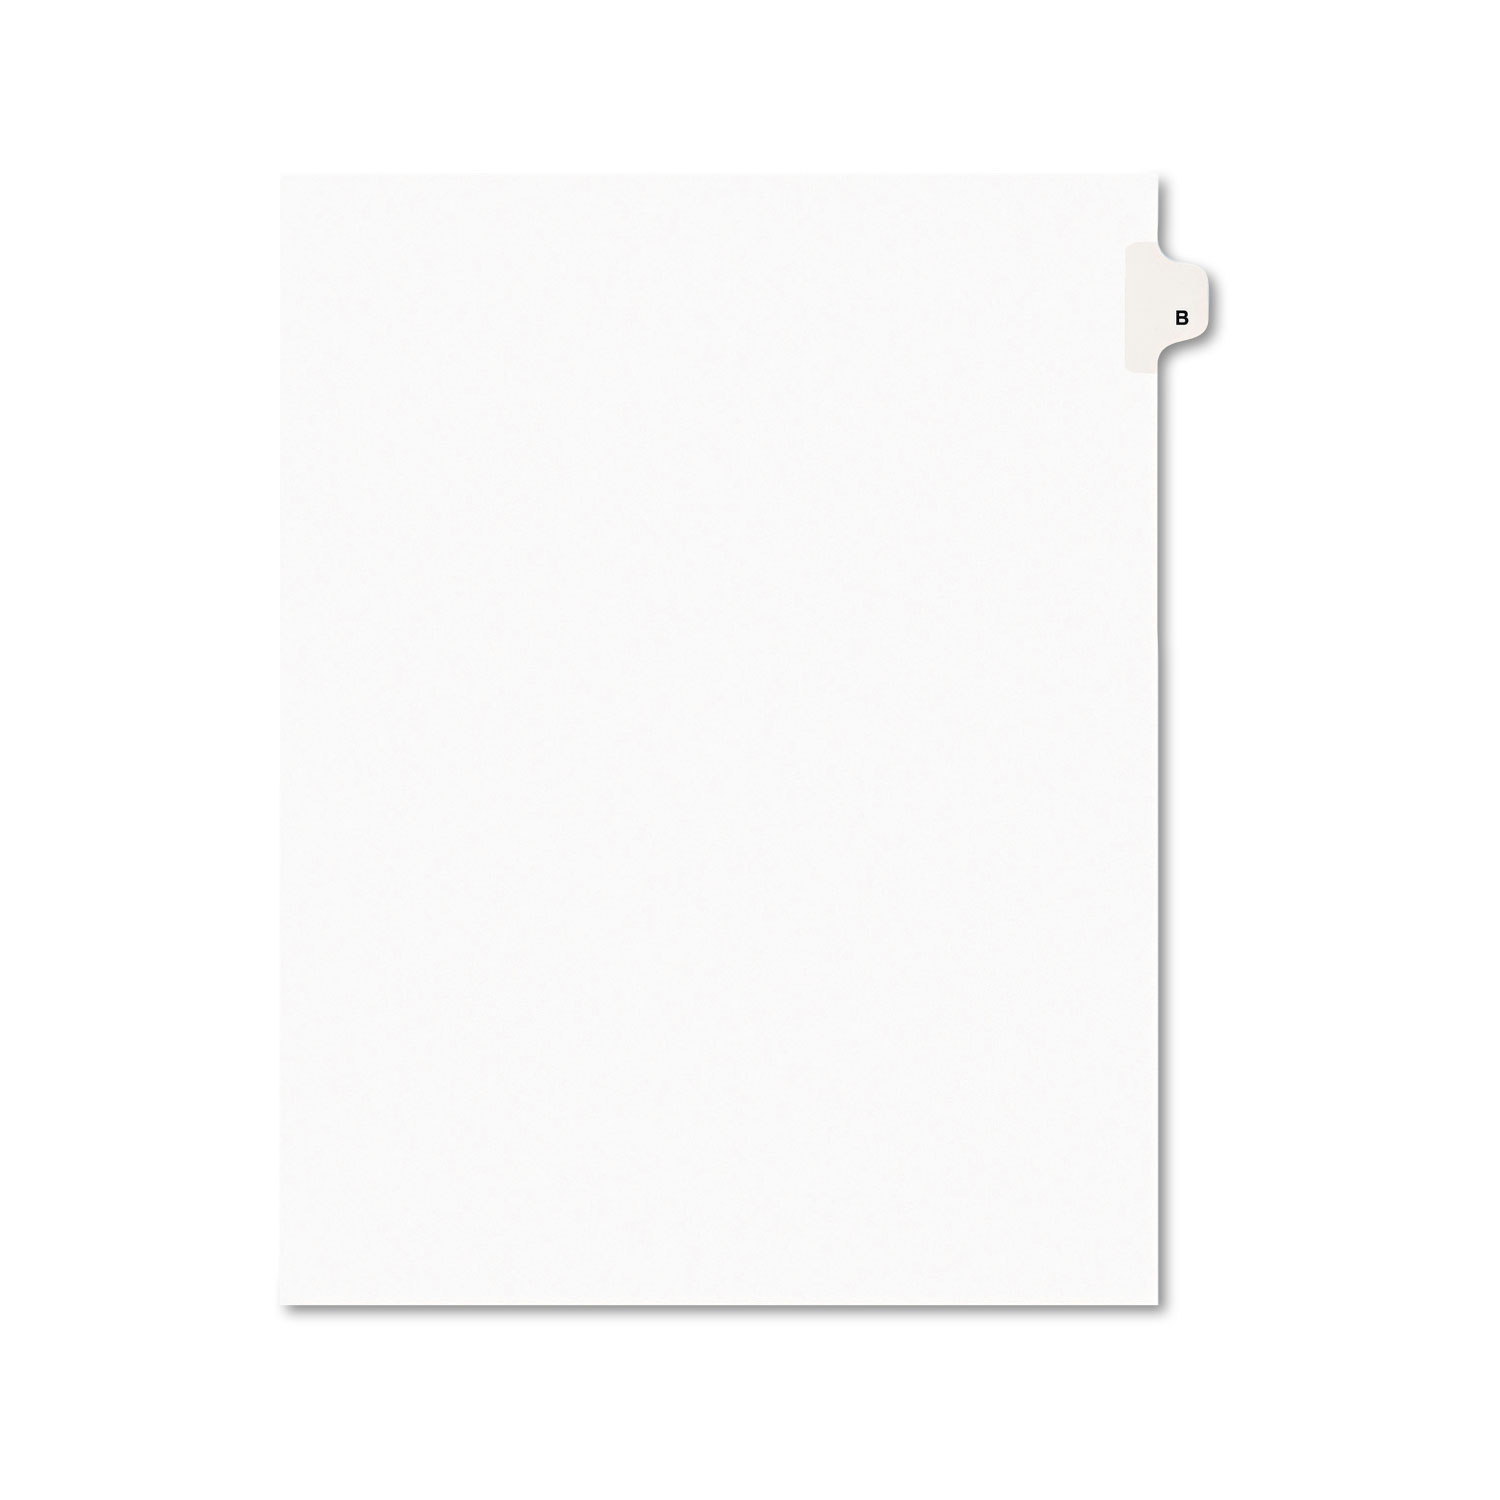  Avery 01402 Preprinted Legal Exhibit Side Tab Index Dividers, Avery Style, 26-Tab, B, 11 x 8.5, White, 25/Pack (AVE01402) 